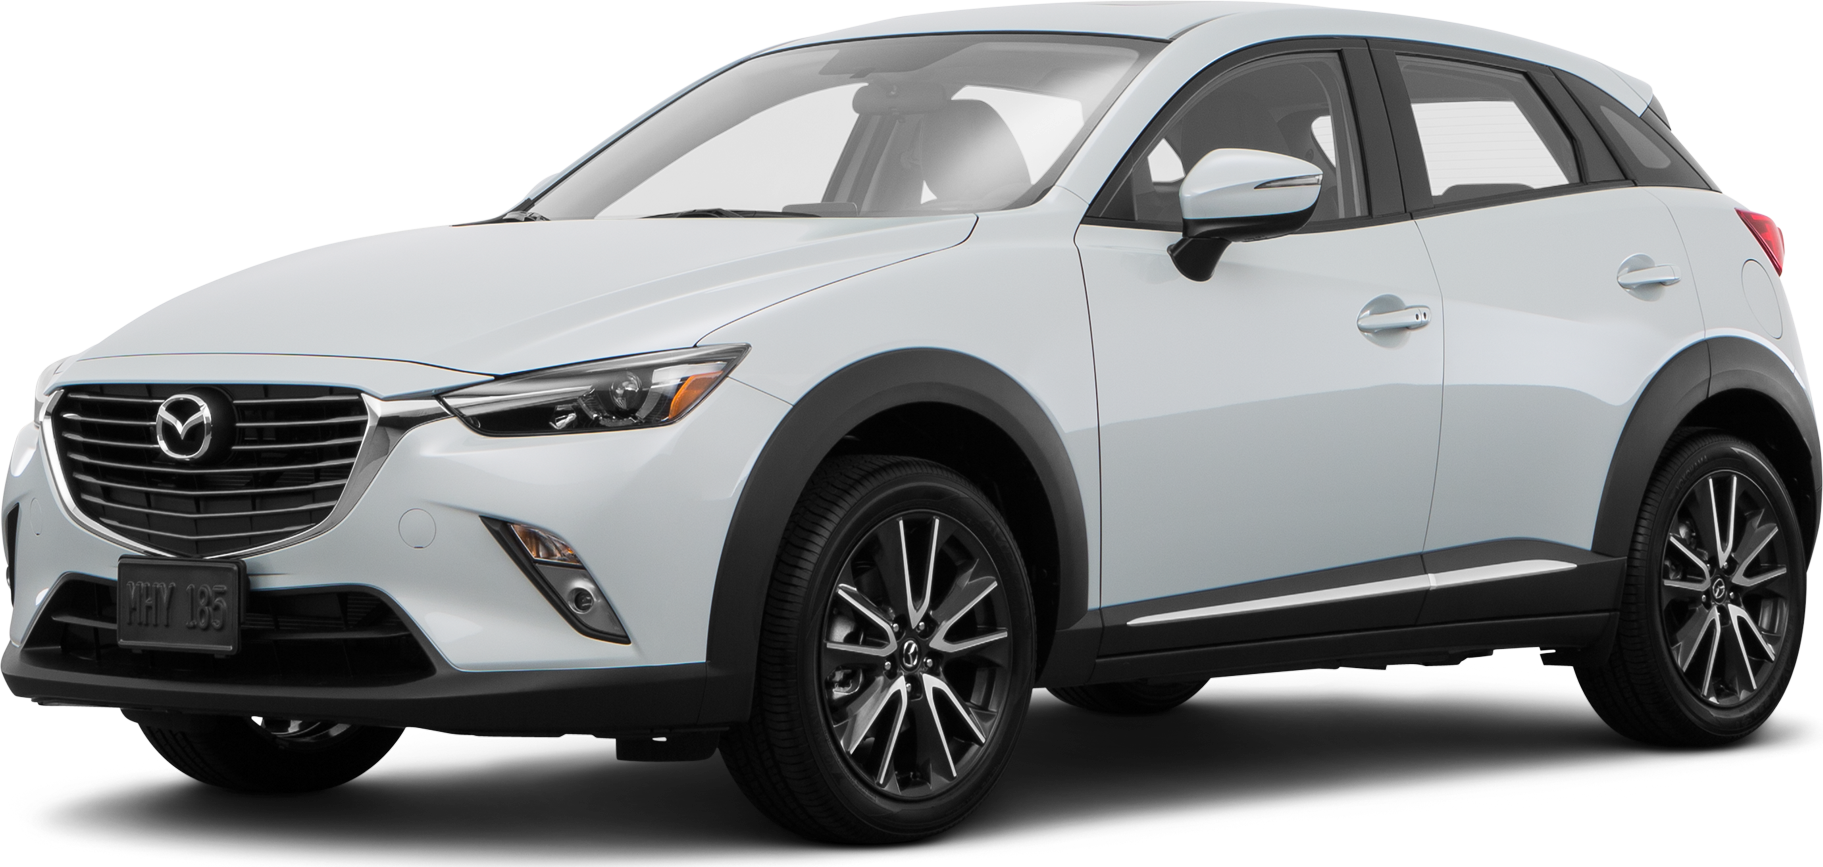 https://file.kelleybluebookimages.com/kbb/base/evox/CP/10644/2017-MAZDA-CX-3-front_10644_032_1823x867_47A_cropped.png